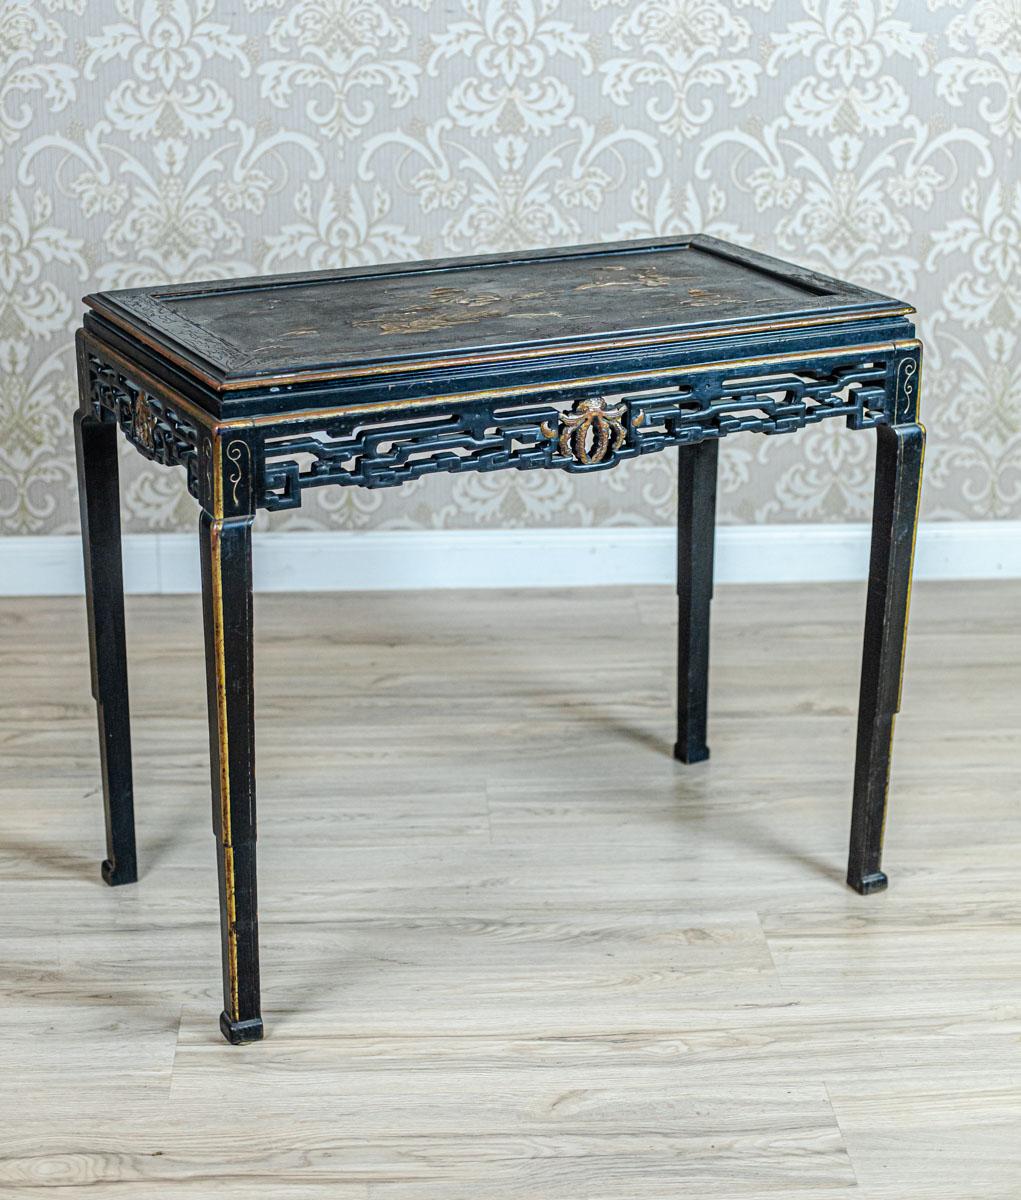 We present you a table from the early 20th century.
The top is decorated with a semi-plastic landscape originally glass-topped.
The apron is all in openwork carvings.

This piece of furniture is in original condition.
However, the black